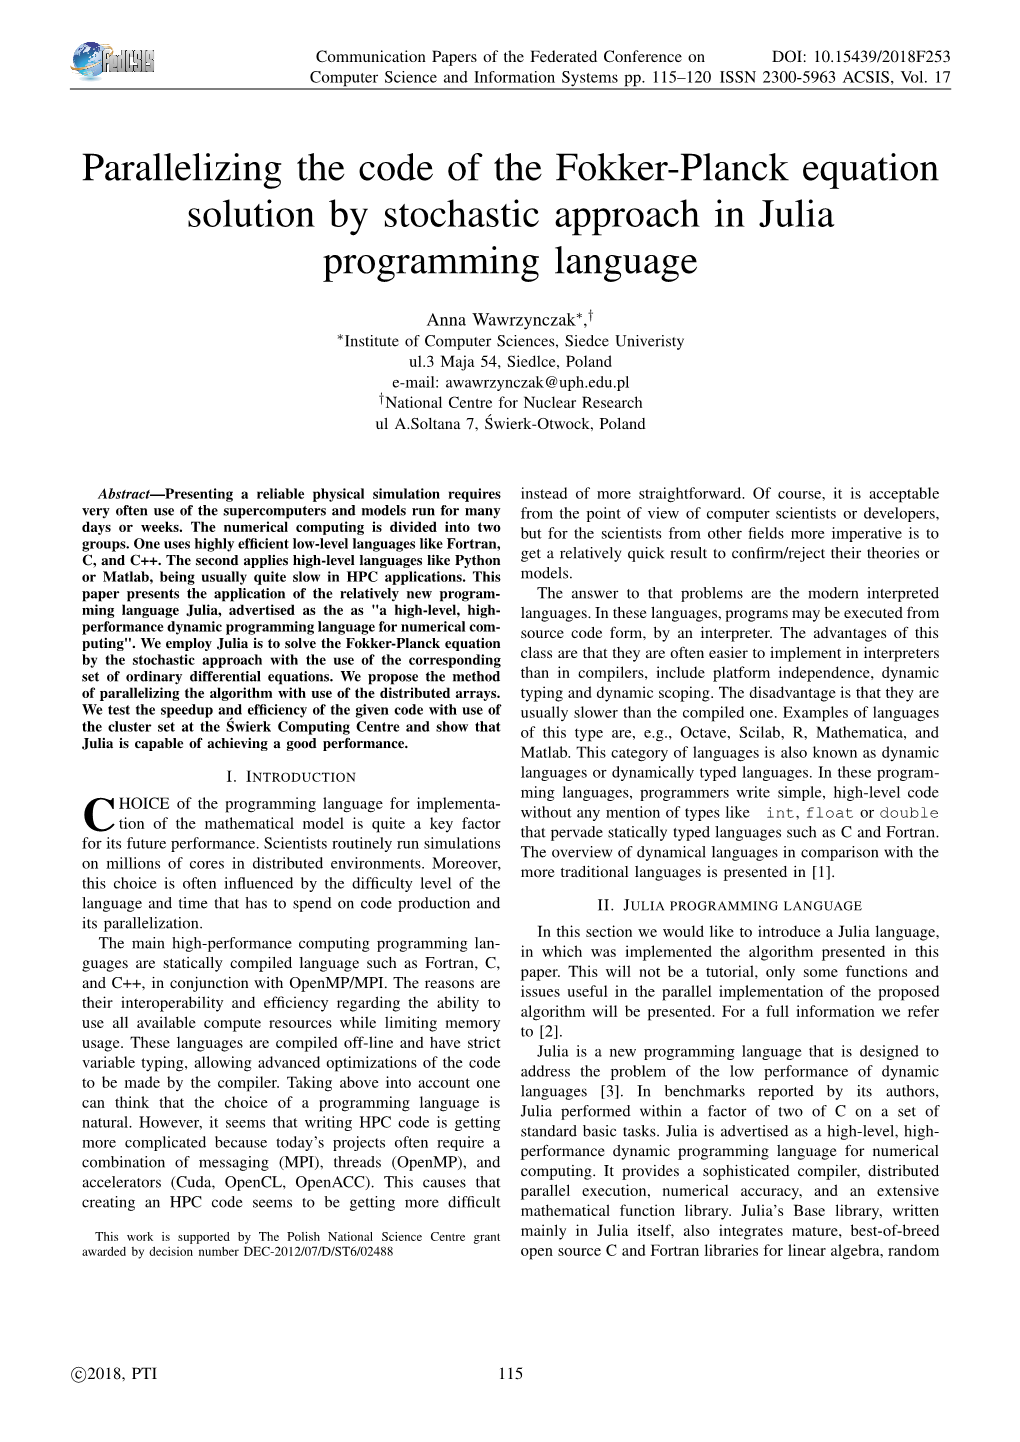 Parallelizing the Code of the Fokker-Planck Equation Solution by Stochastic Approach in Julia Programming Language